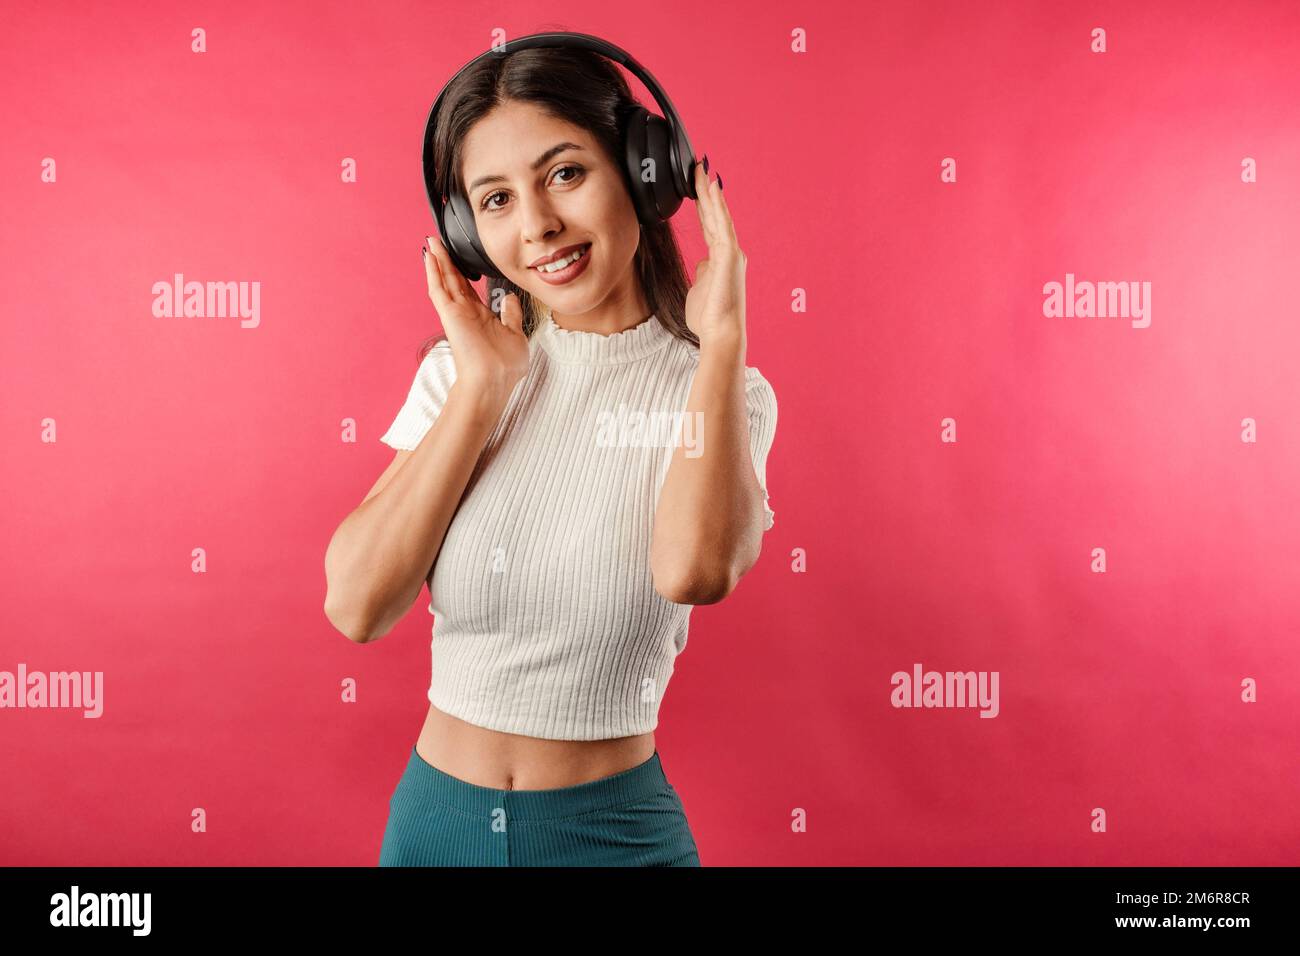 Young beautiful woman wearing ribbed crop isolated over red background listening to music in a pleasant way poses by touching headphones. Very happy, Stock Photo